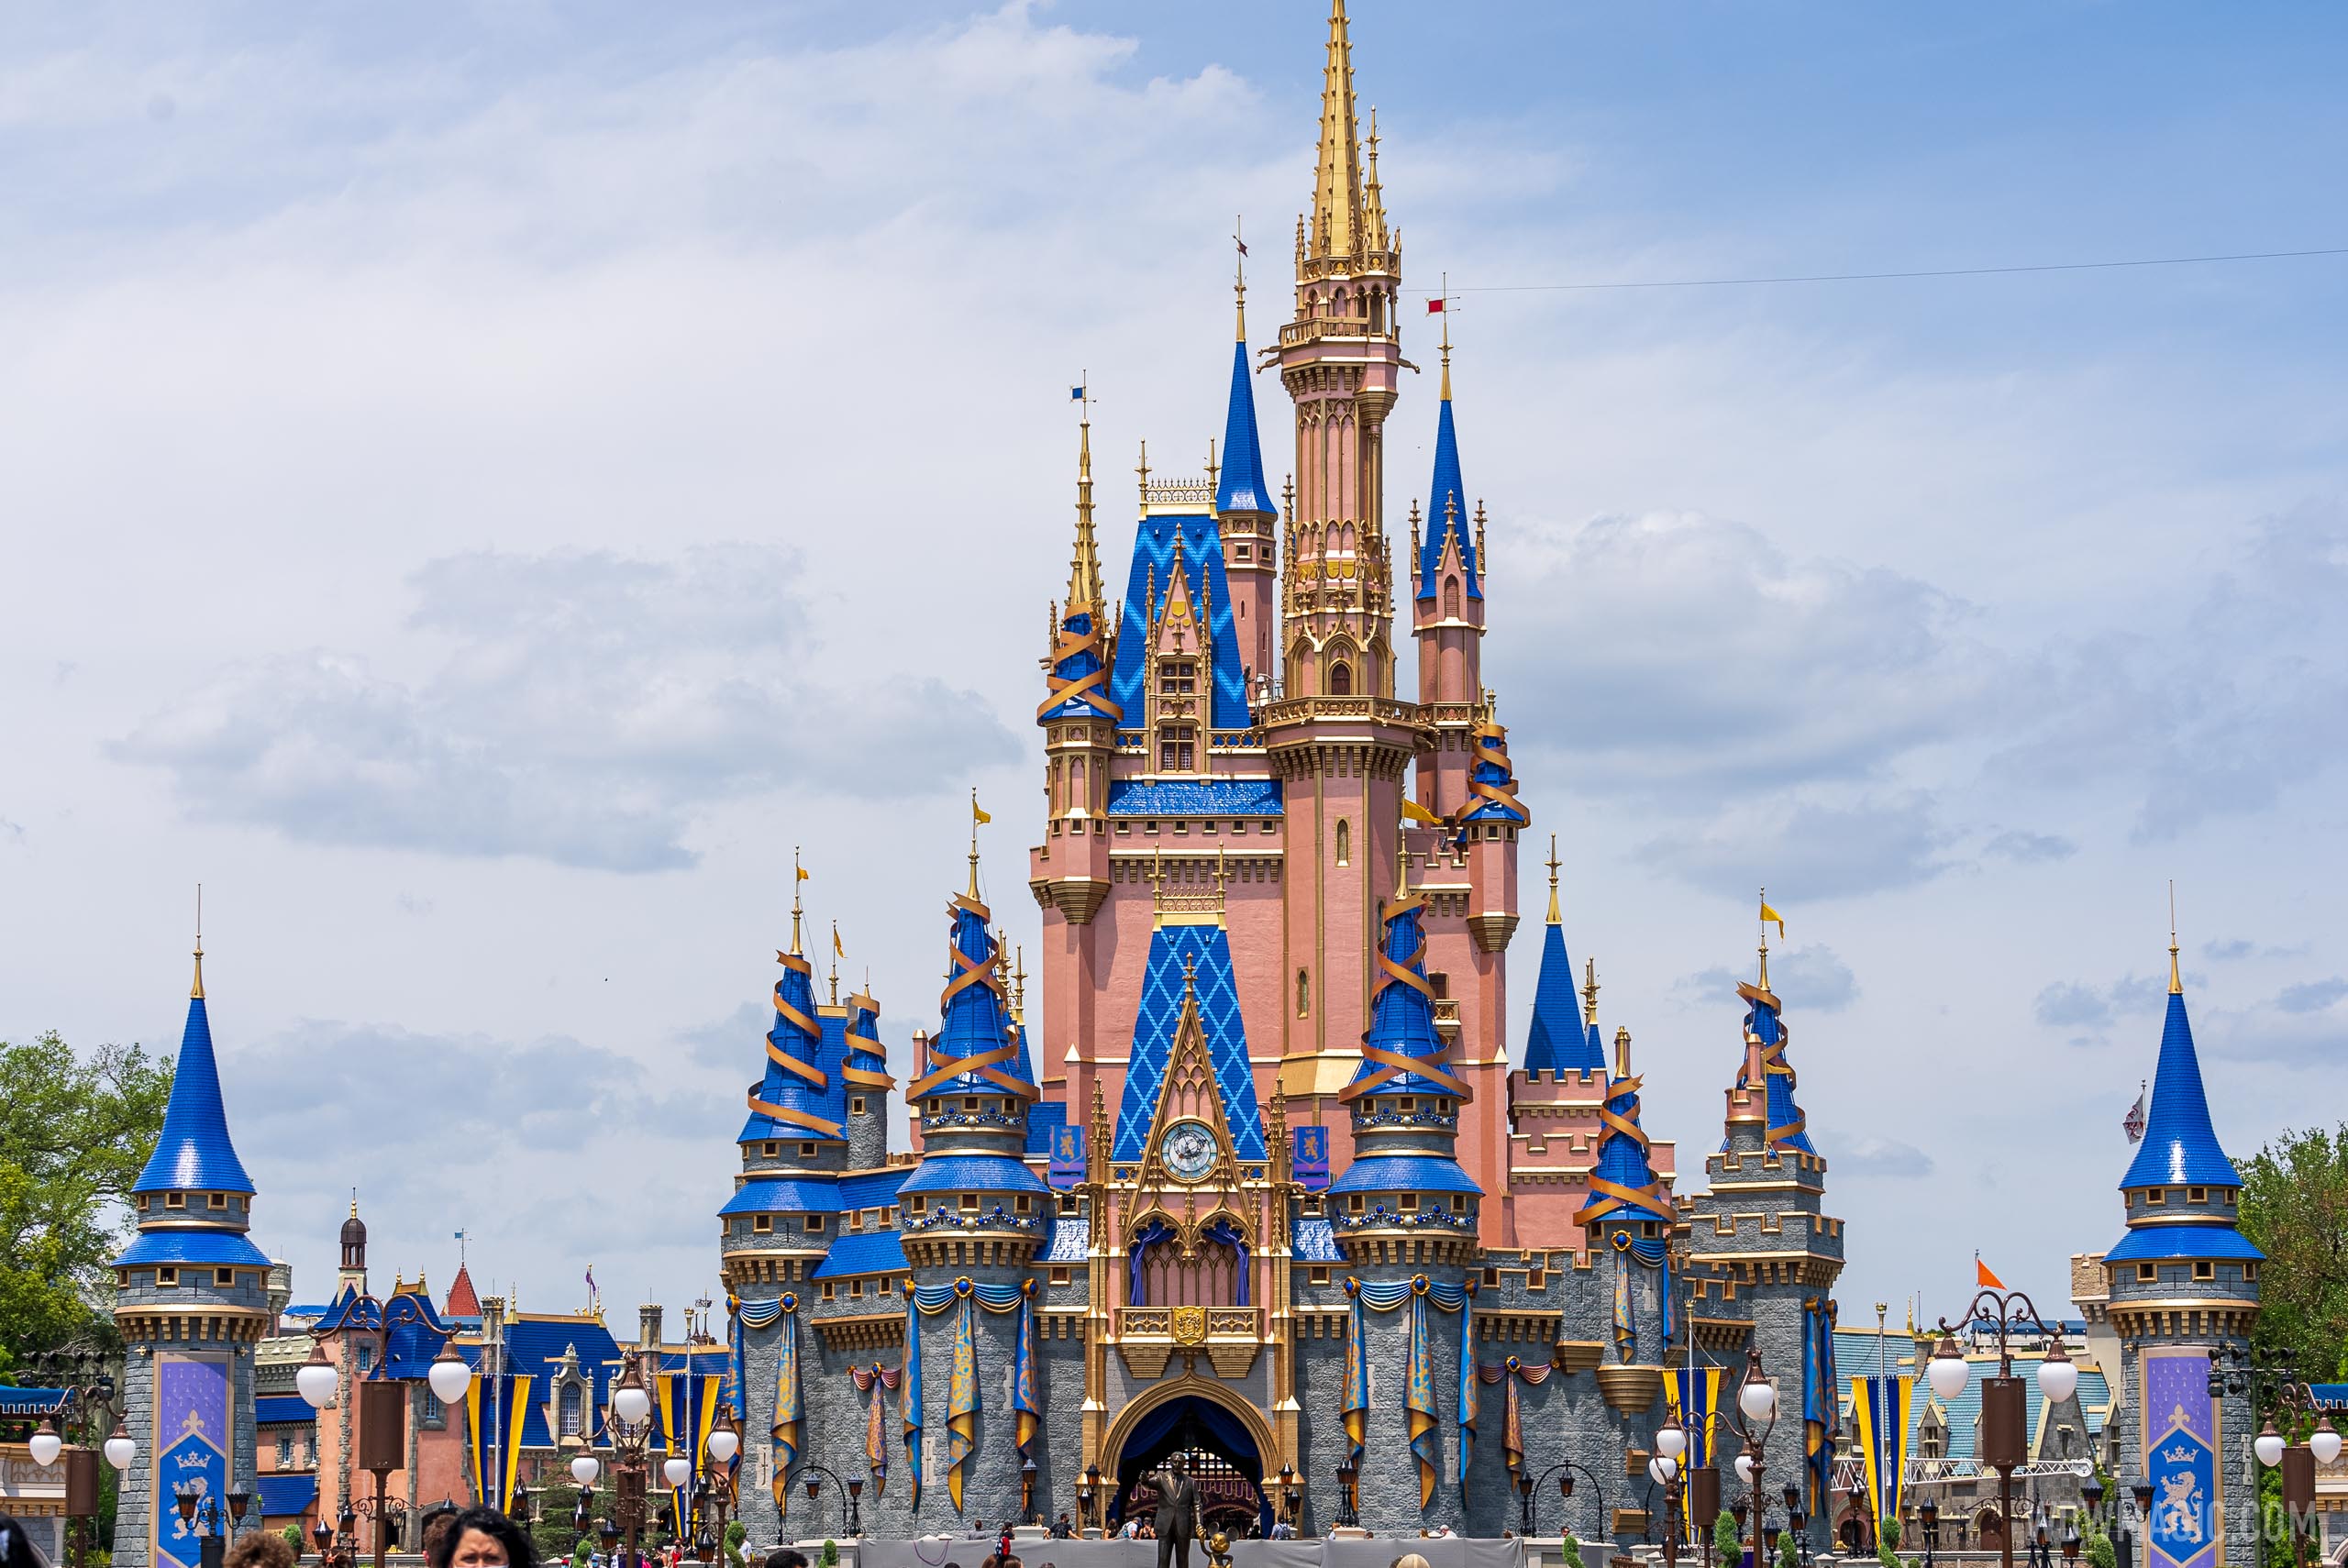 Top highlights for the Disney World 50th Anniversary - All Vacation Dreams